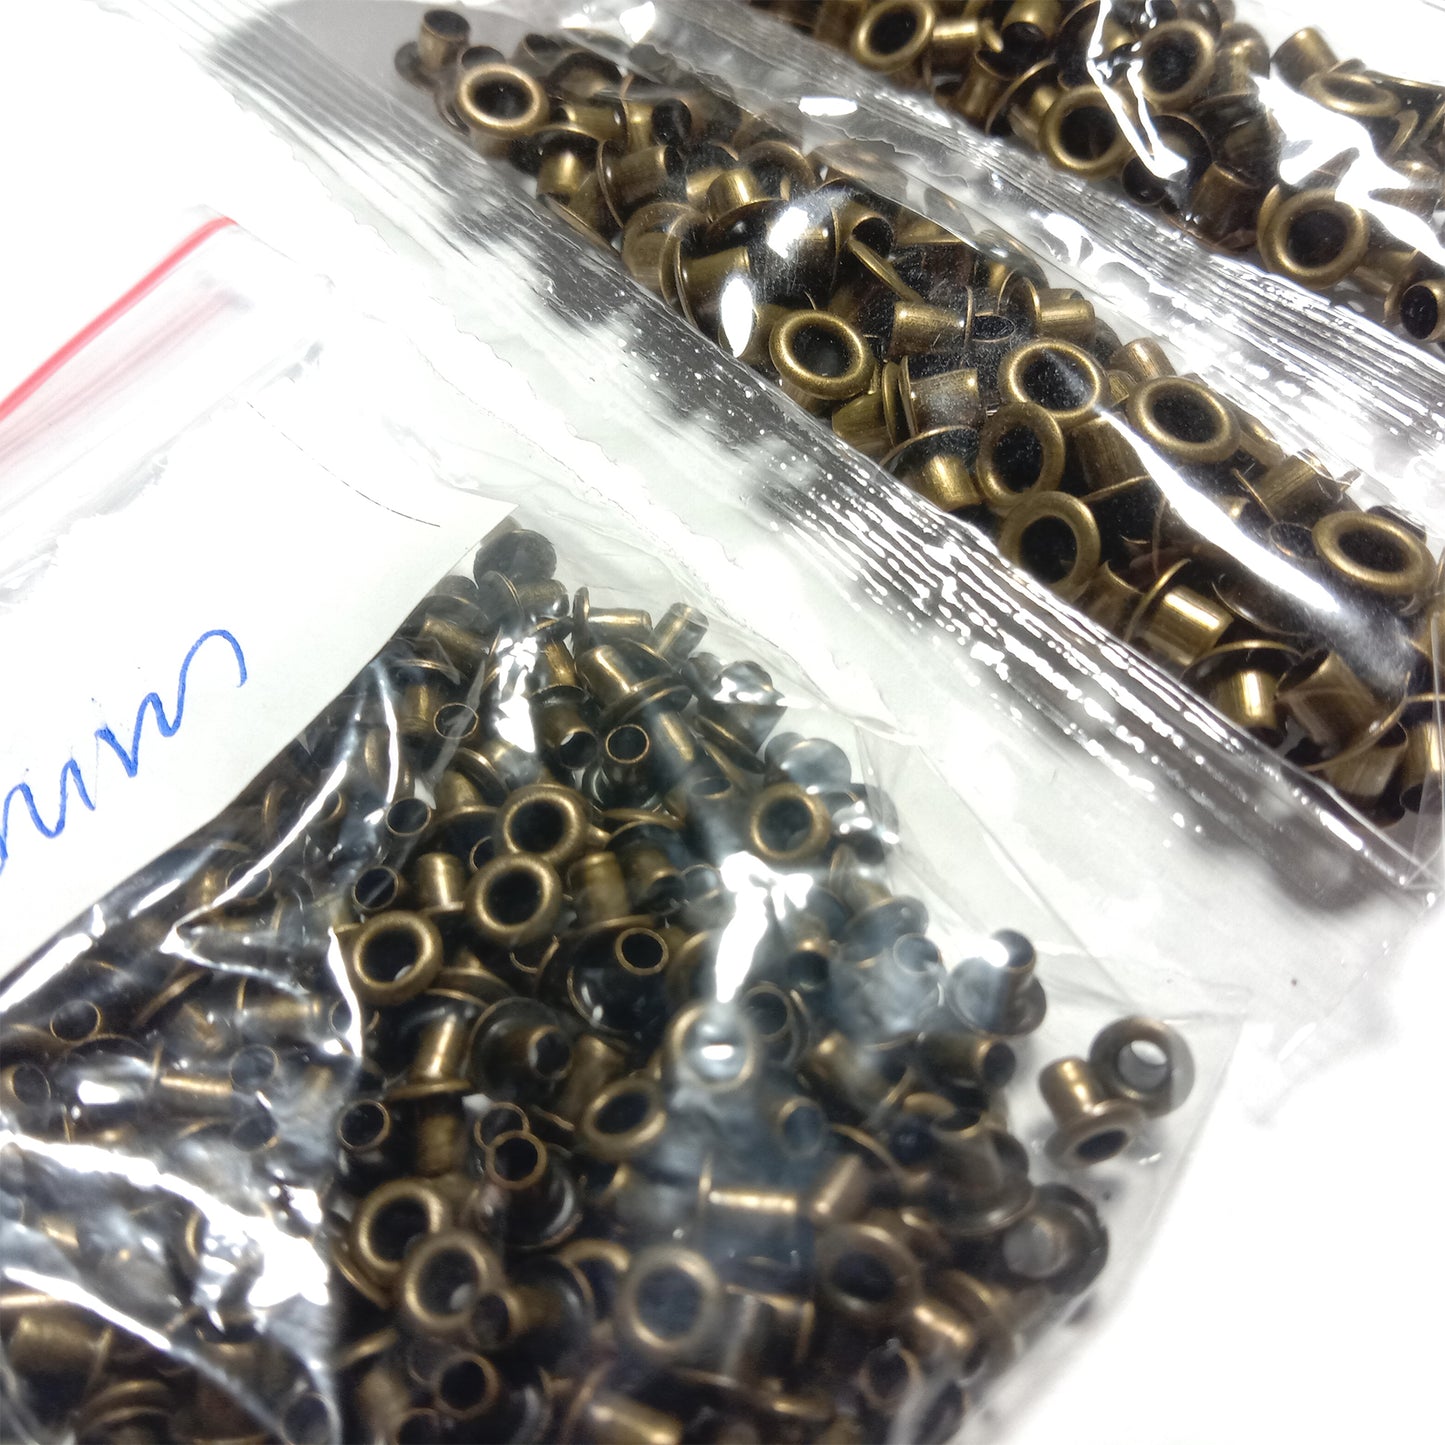 4x200pcs Set of 2mm 3mm 3.5mm 5mm Deep Eyelets For Belts No Washers Metal Buttonholes Buckle Clothing Buttons Bronze Craft